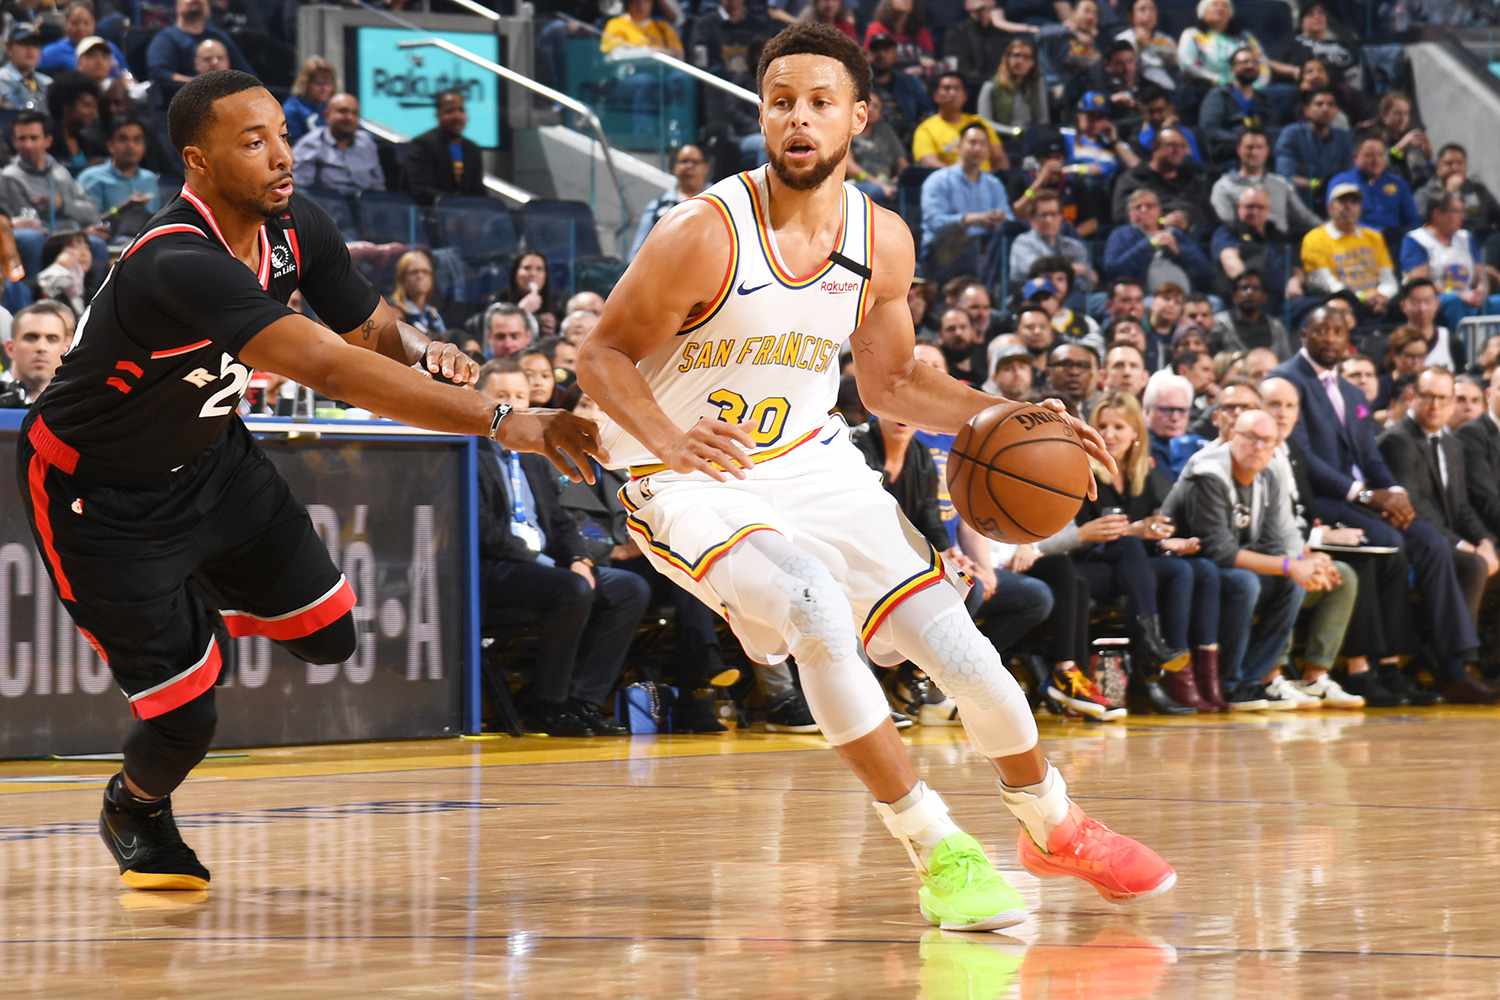 Stephen Curry #30 of the Golden State Warriors drives to the basket against the Toronto Raptors on March 5, 2020 at Chase Center in San Francisco, California